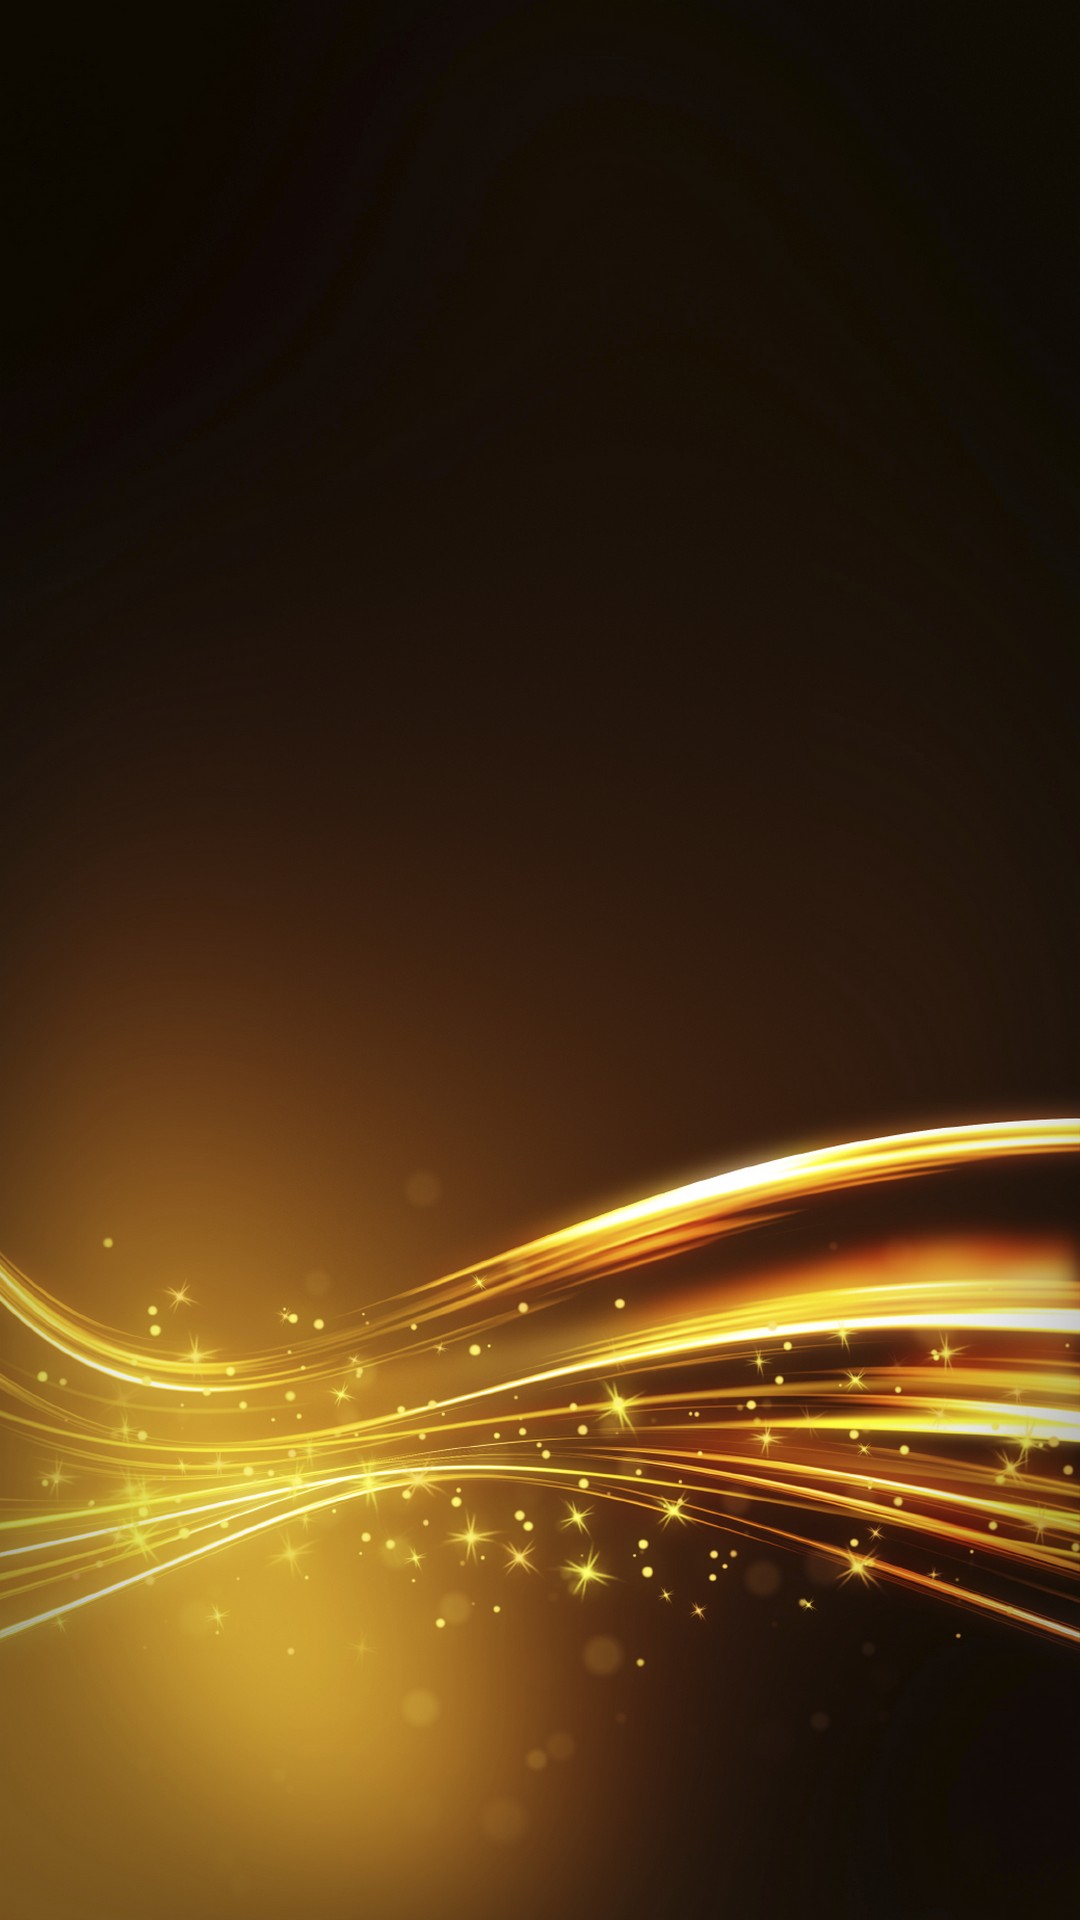 Android Wallpaper Black and Gold with HD resolution 1080x1920